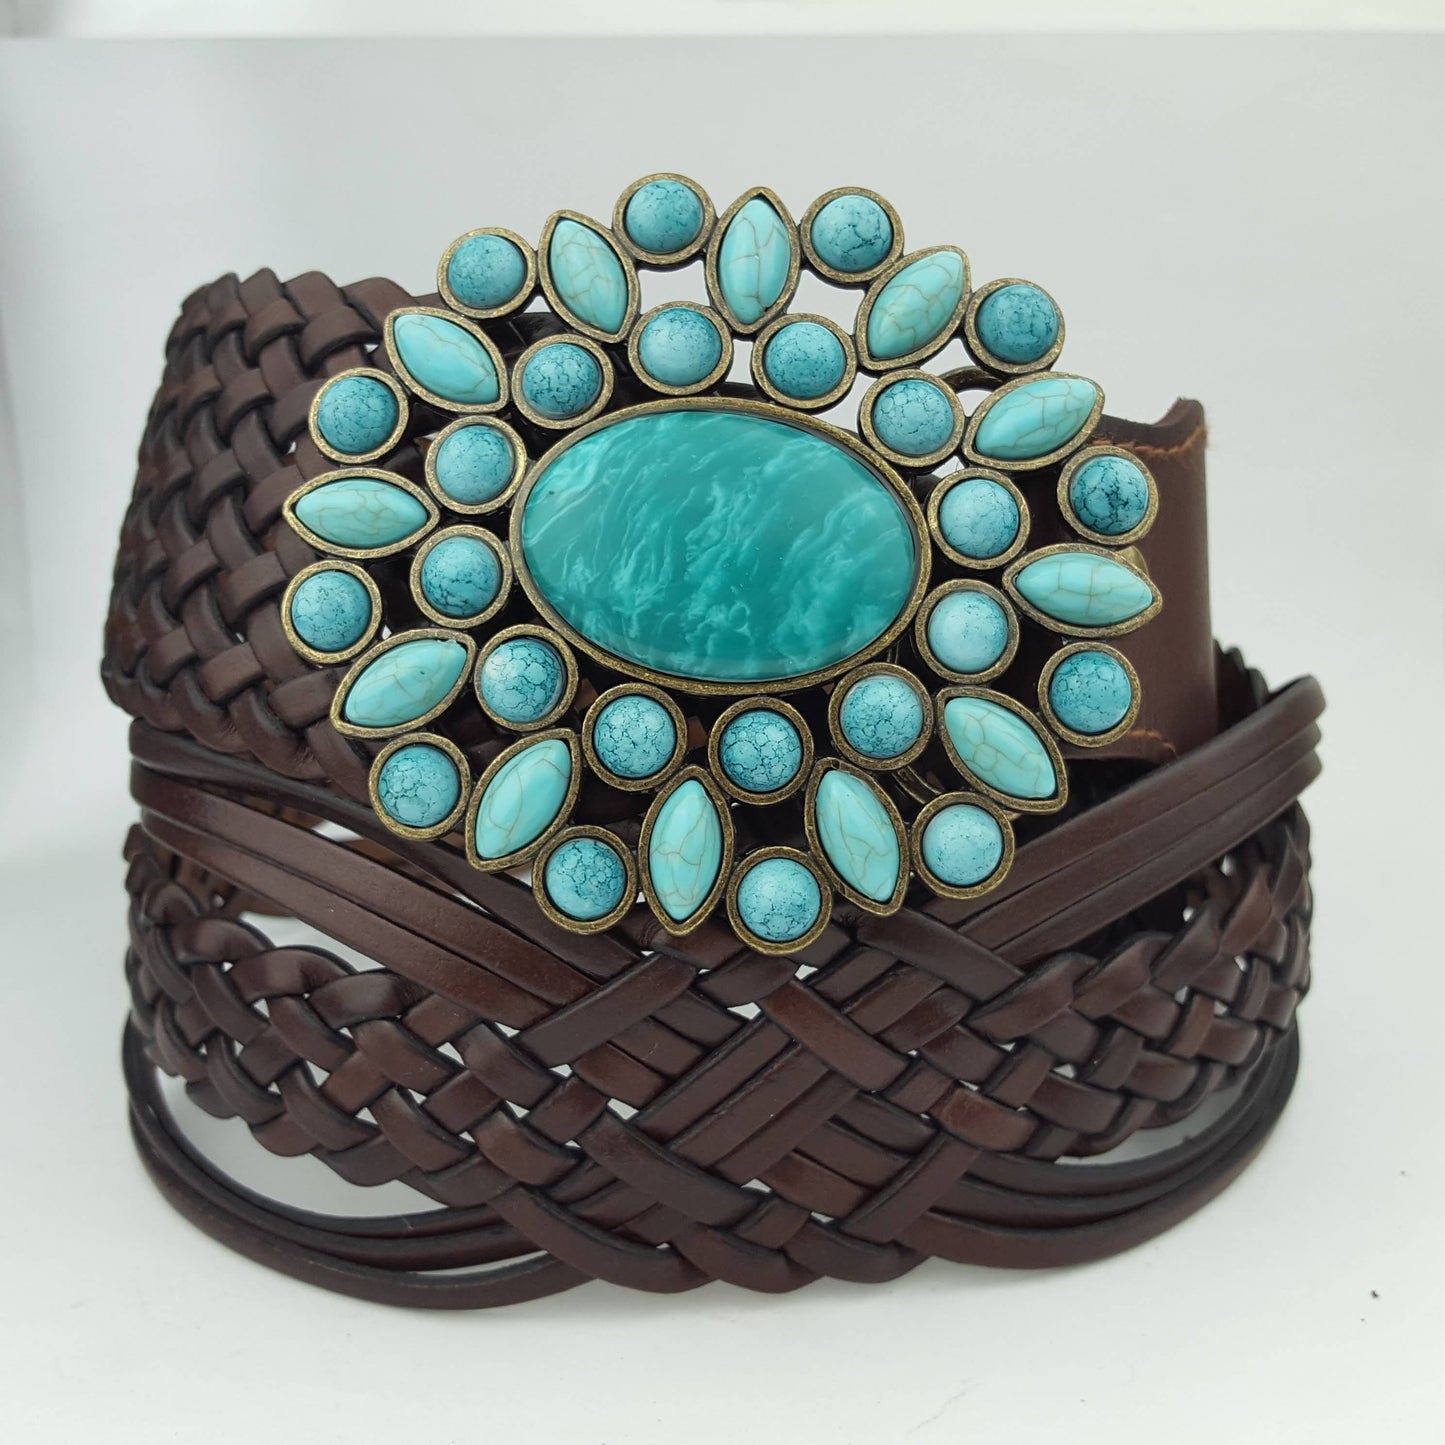 Hand Braided Leather Belt with Turquoise Style Buckle - La De Da